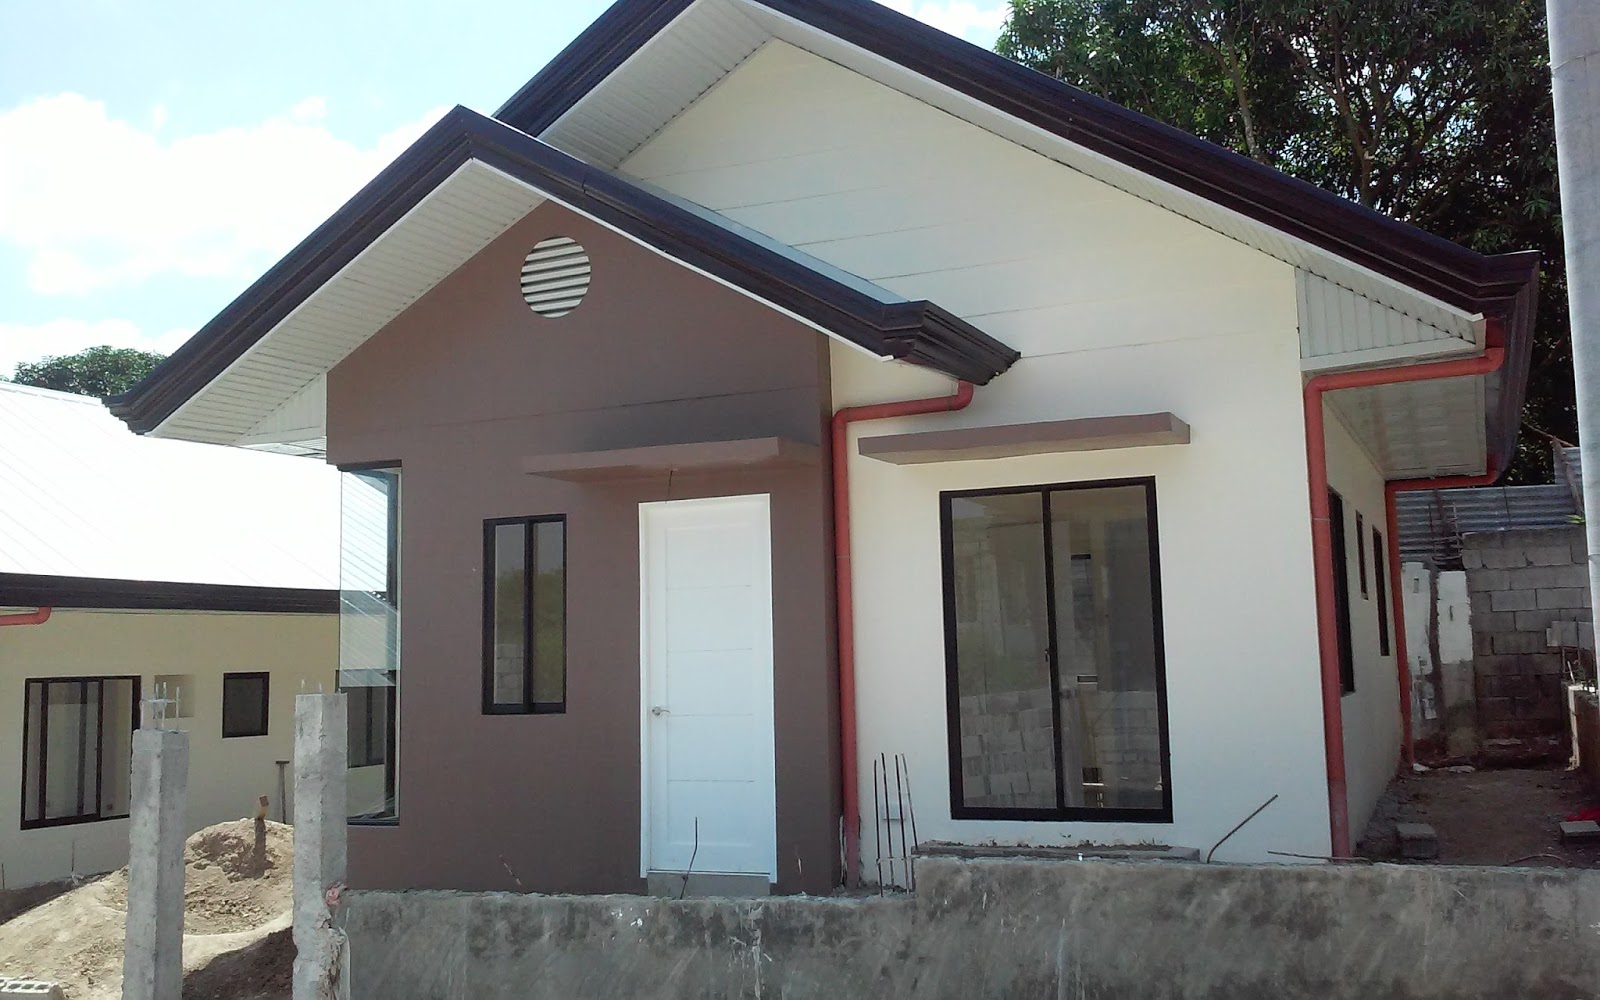 Small low-cost houses are those whose models and designs were particularly influenced by the need to keep the costs become cheaper. That might include the use of low-cost materials, simple building skills or a simple building structure. Less is more with these low-cost home designs and styles, using sustainable architecture and low-cost housing technology to build your dream home on a small budget.    These 50 Photos Of Beautiful Small Low-Cost Houses that were very low-cost to build—we show you our favorites! Which one do you like the most?       Advertisements                                               Sponsored Links                                                                 Advertisement                                                                                                      RELATED POSTS:    50 Photos Of Small And Affordable House Design For Simple And Comfortable Lifestyle   Small houses are gaining in popularity recently. Not only does it require the small land area to built, but homeowners can still enjoy a beautiful and modern style house on a smaller budget.  Small houses characterize one of modern house design patterns. Small houses mix chic and style, offering stylish and jazzy comfortable spaces with huge windows and lovely inside design. Outside seating regions around these small houses frequently furnish terrific perspectives and interface individuals with nature.    Adorable and comfortable, small houses are more affordable and pull in many individuals willing to scale down, change bigger homes for little spaces, spare cash and time for lovely exercises and treks. These collections of little inside outline thoughts present wonderful homes that are little, yet unwinding, welcoming and stylish. These little spaces offer an awesome method to rearrange life and make unwinding and agreeable way of life in a small house.    Small houses are incredible for all who can maintain a strategic distance from huge home loan installments. A commonsense purpose behind the little house configuration patterns and scaling back is a critical one. Purchasing an expansive home does not permit to spare cash on most loved exercises and long trips. They want to spare cash while making an appealing and agreeable way of life in little spaces appreciates space-sparing inside plan and smart improving small houses.      Browse our selection of small house designs to find your dream home today.   Advertisements                                               Sponsored Links                                                                                                           Advertisement                                                                                                      RELATED POSTS:    50 Photos Of Small Bungalow House Design To Help You Start Planning And Building Your Dream Small House.   Bungalow houses are usually low houses consisting of one floor. This kind of home frequently had wide verandas over the front or wrapping around the house giving extra family gathering areas.   The first bungalow houses were very small and just one story in height. Homes frequently had wide verandas over the front or wrapping around the house giving extra family gathering areas. Today bungalows are still considered to be single stories yet may incorporate incomplete second floors or space zones.    Bungalow house designs have turned into the absolute most mainstream and looked for after house designs accessible today. By deciding on bigger consolidated spaces, the intricate details of everyday life - cooking, eating and assembling - end up plainly shared encounters. What's more, an open floor design can make your home feel bigger, regardless of whether the area is modest. In this way, even a little, more affordable house design can offer the spaciousness you look for.    These small bungalow house designs may simply help make your fantasy of owning a small house a reality. Building it yourself will spare you cash and guarantee that you're getting an amazing home. You'll discover an assortment of house ideas including home designs in an assortment of sizes from the small to as extensive as you can get the chance to be viewed as a small home. The styles may vary as well, so make sure to look at them all.    Space Saving House Design Ideas: Find The Perfect Design For Your New Home   Do you believe in perfect homes? Ideally, homes are really who lives inside. It doesn't have to look perfect, but we cannot ignore the fact that the ambiance also plays a great role in maintaining a house you can call home.